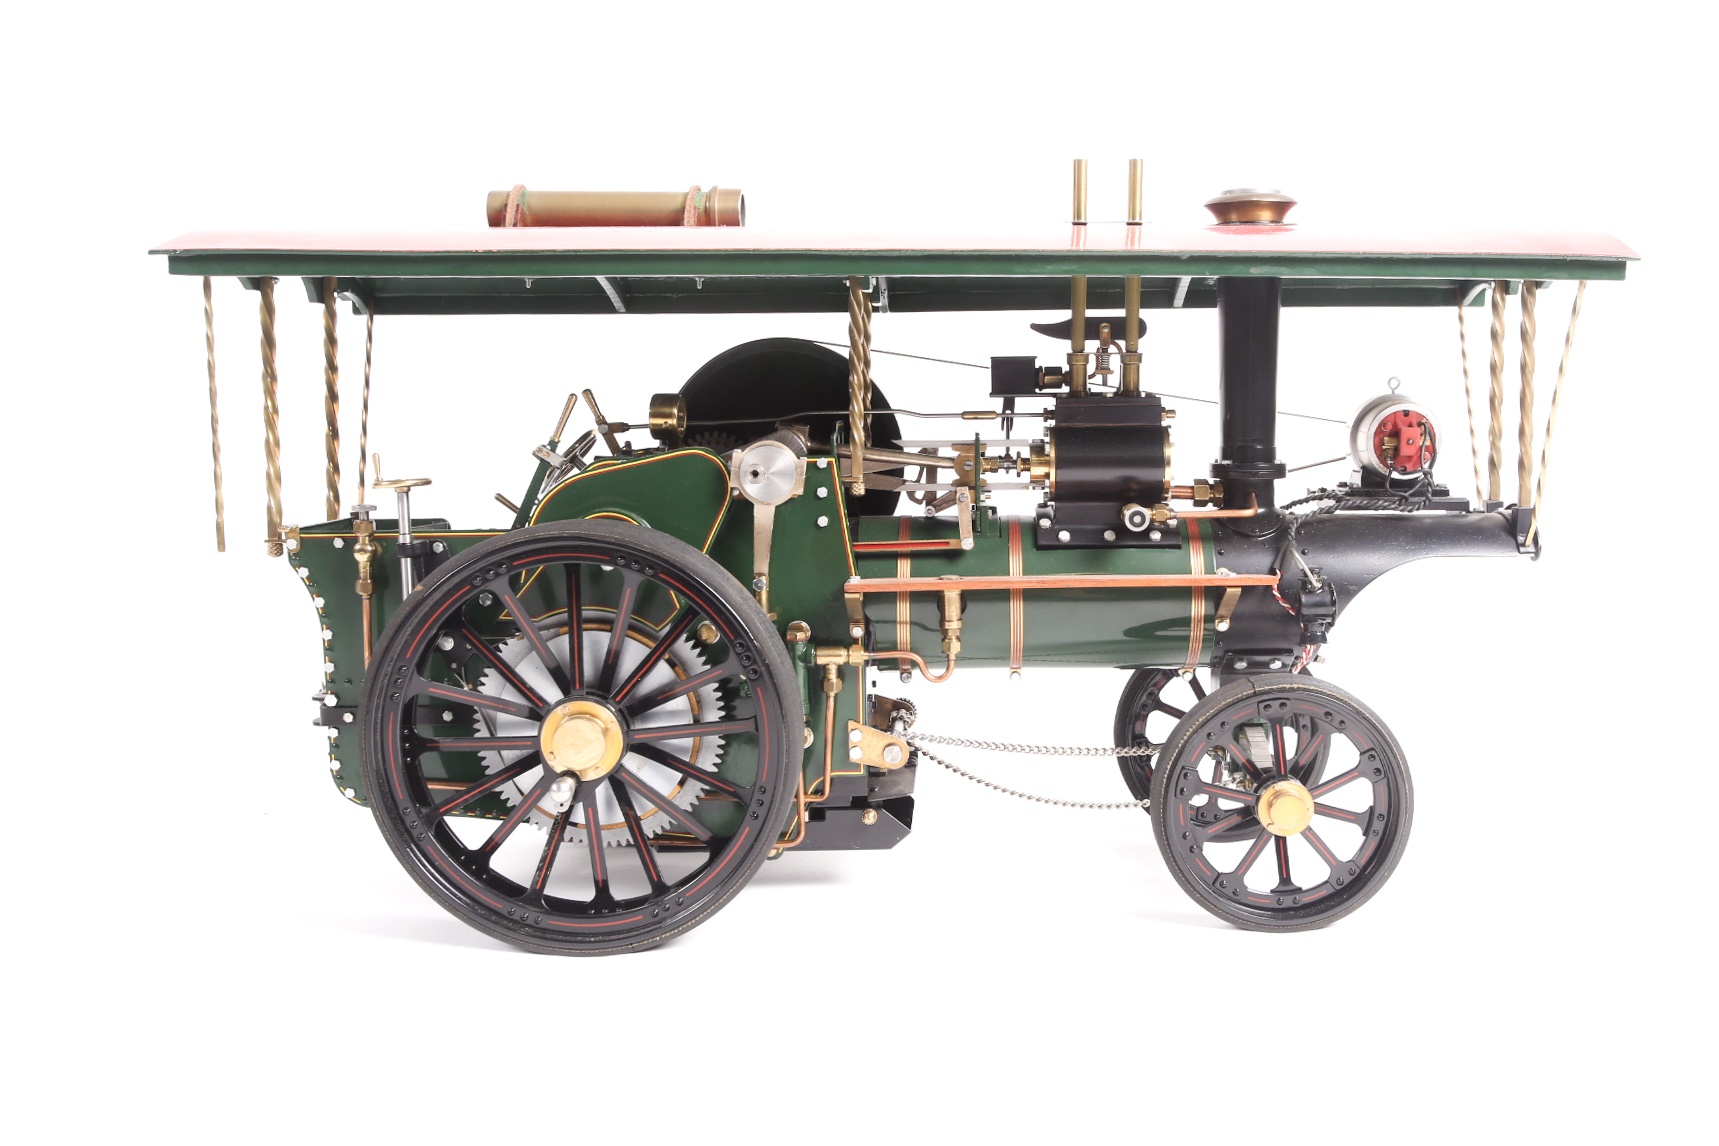 Maxwell-Hemmens, an 1" scale live steam model of a showman's engine